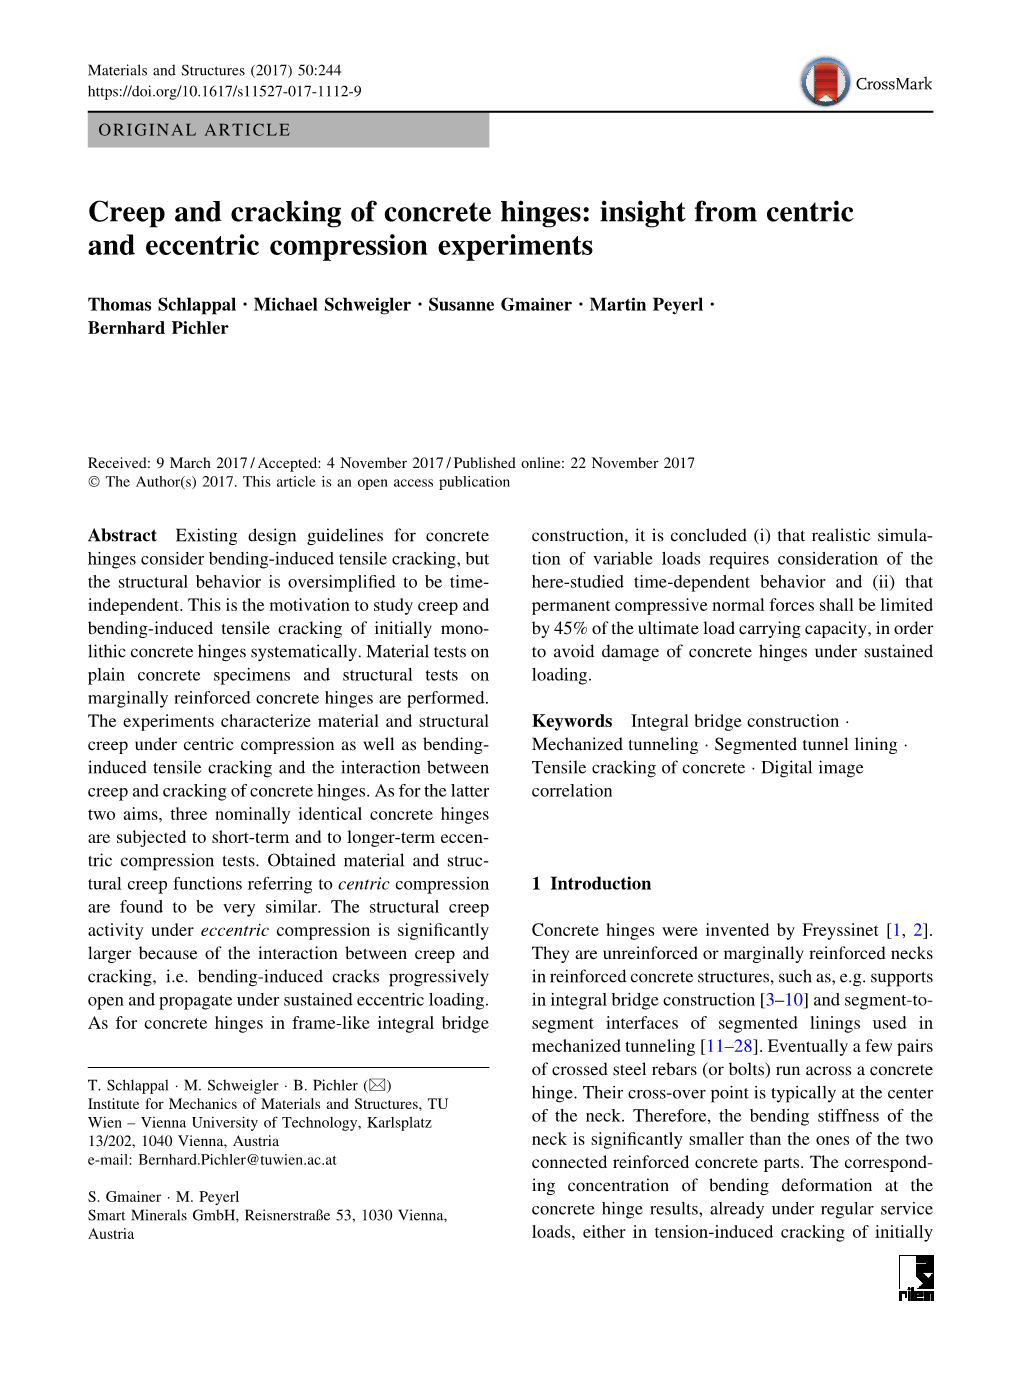 Creep and Cracking of Concrete Hinges: Insight from Centric and Eccentric Compression Experiments